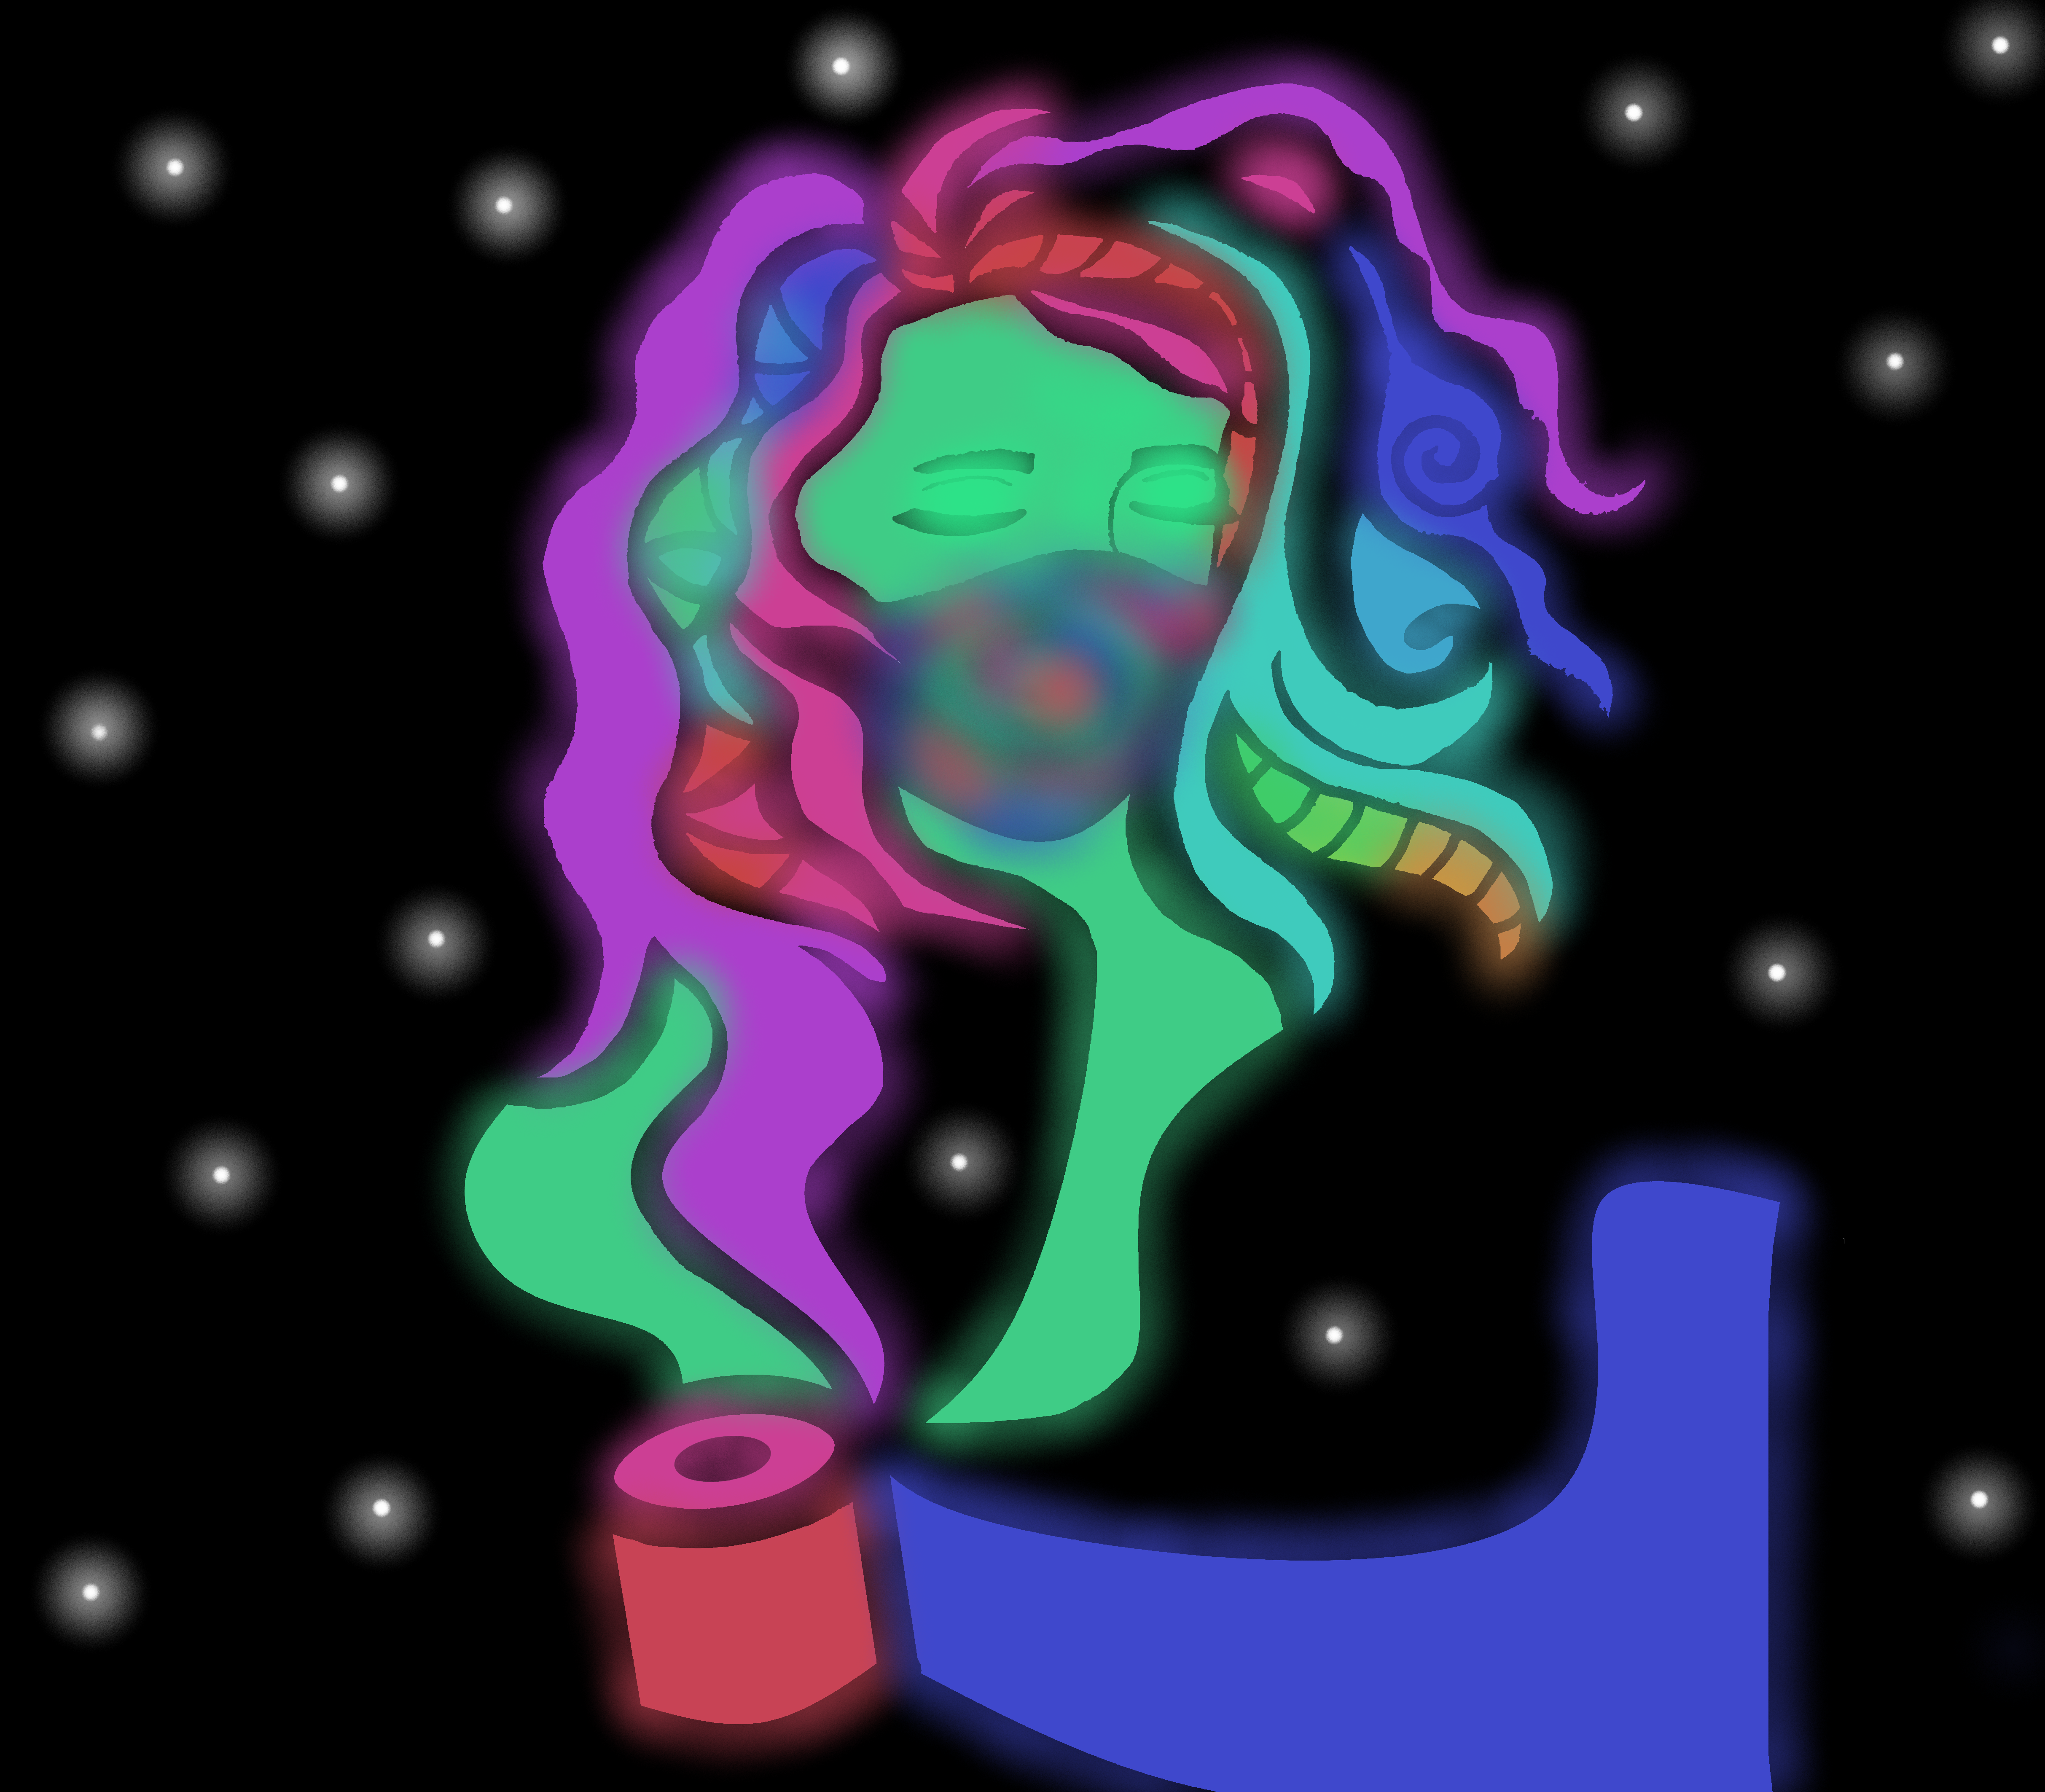 Digital illustration of a woman in a mask in green, blue, and pink over a black background with stars